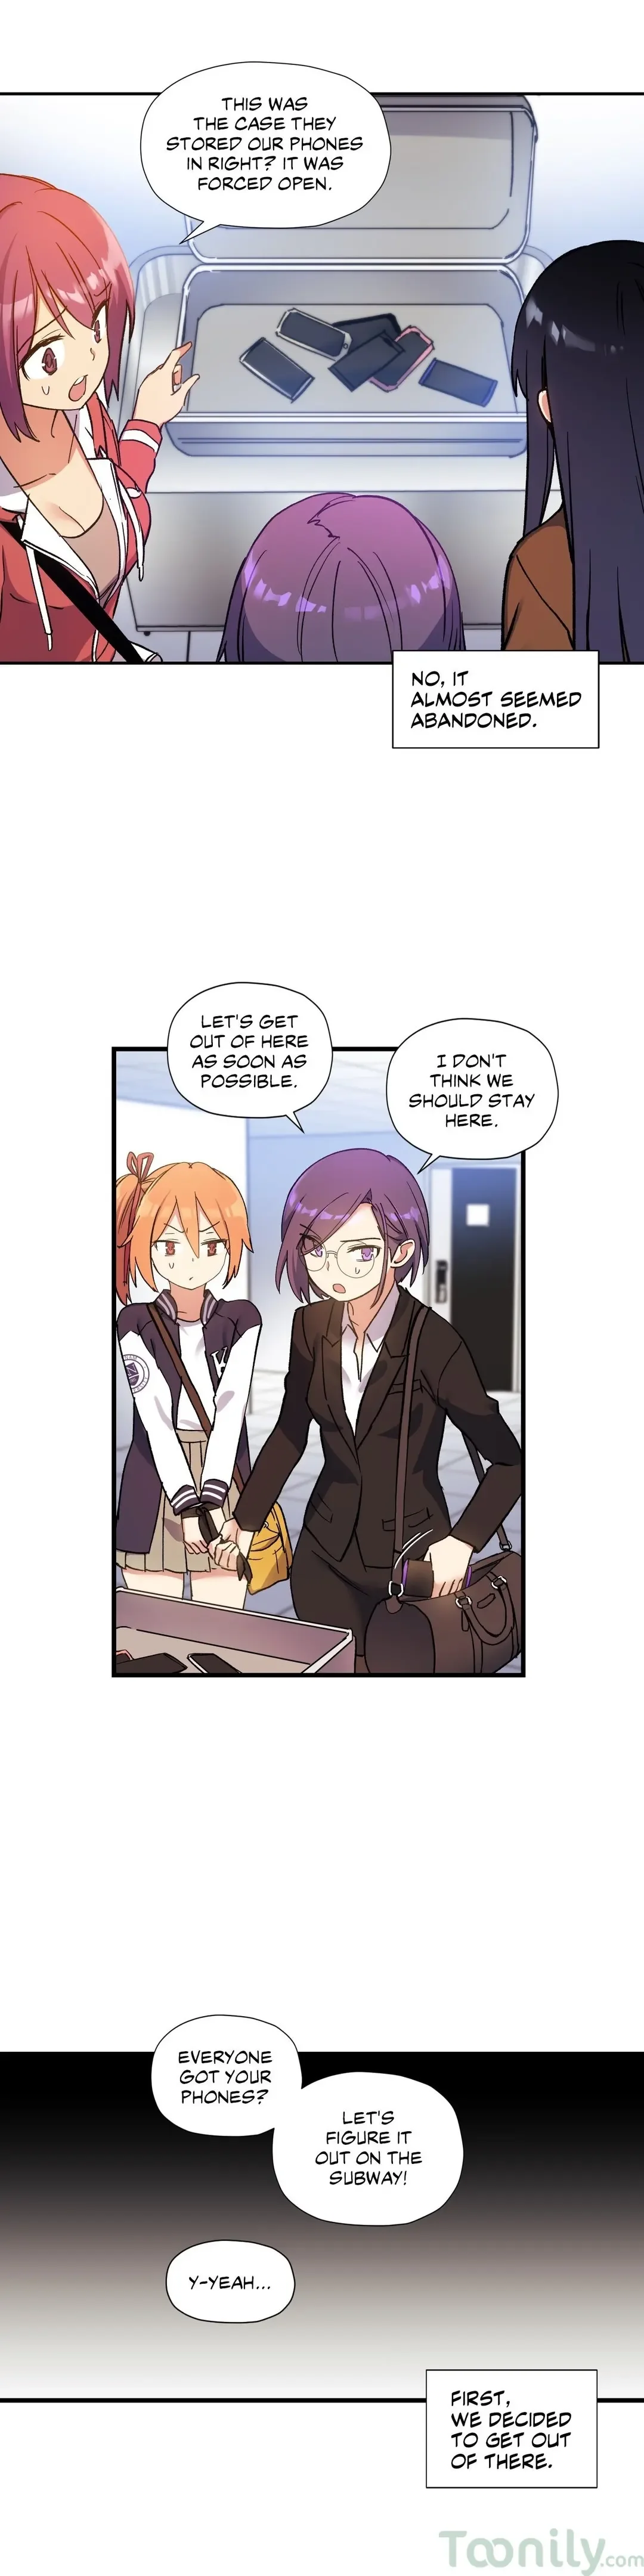 under-observation-my-first-loves-and-i-chap-41-13